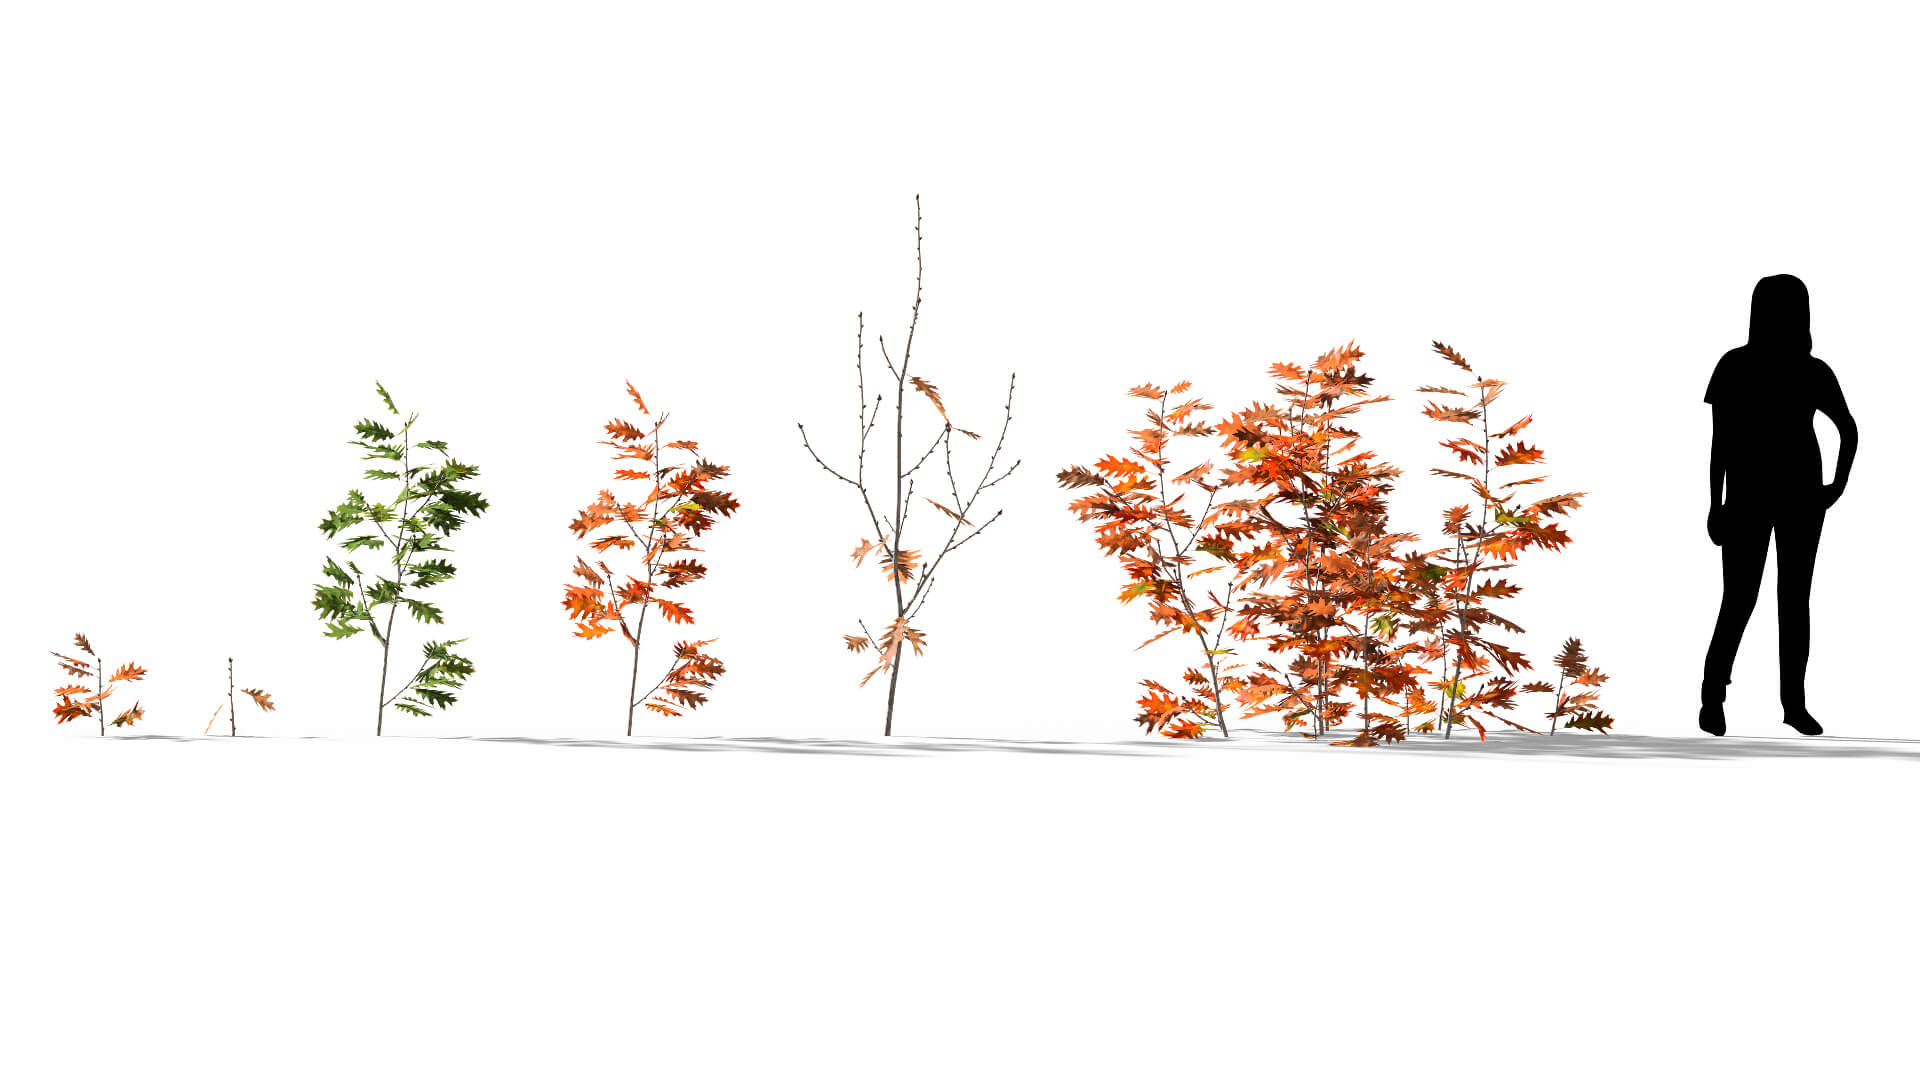 3D model of the English oak seedling Quercus robur seedling different presets